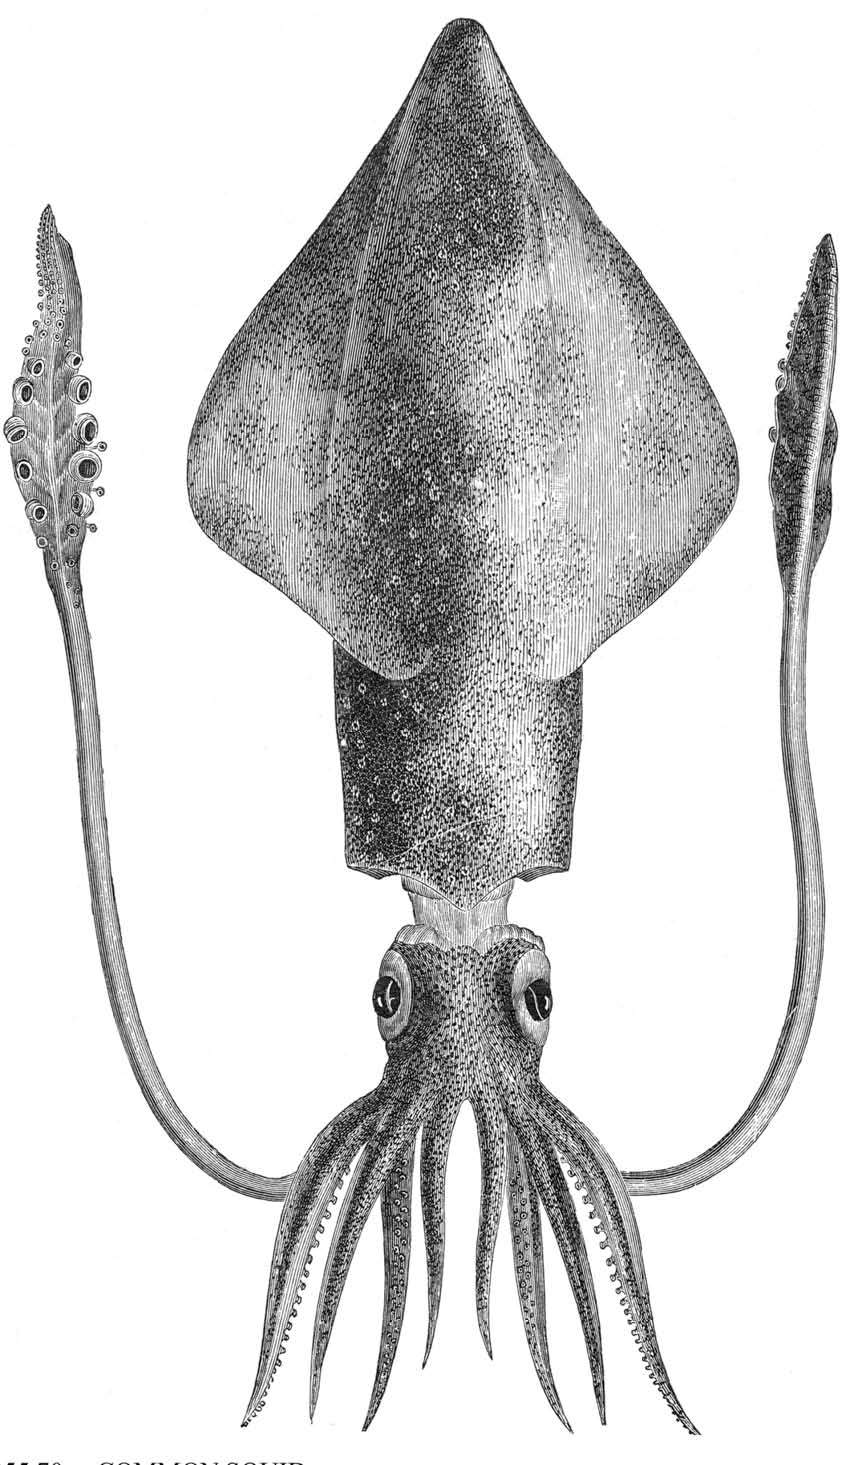 Engraving of a giant squid, artist and date unknown.